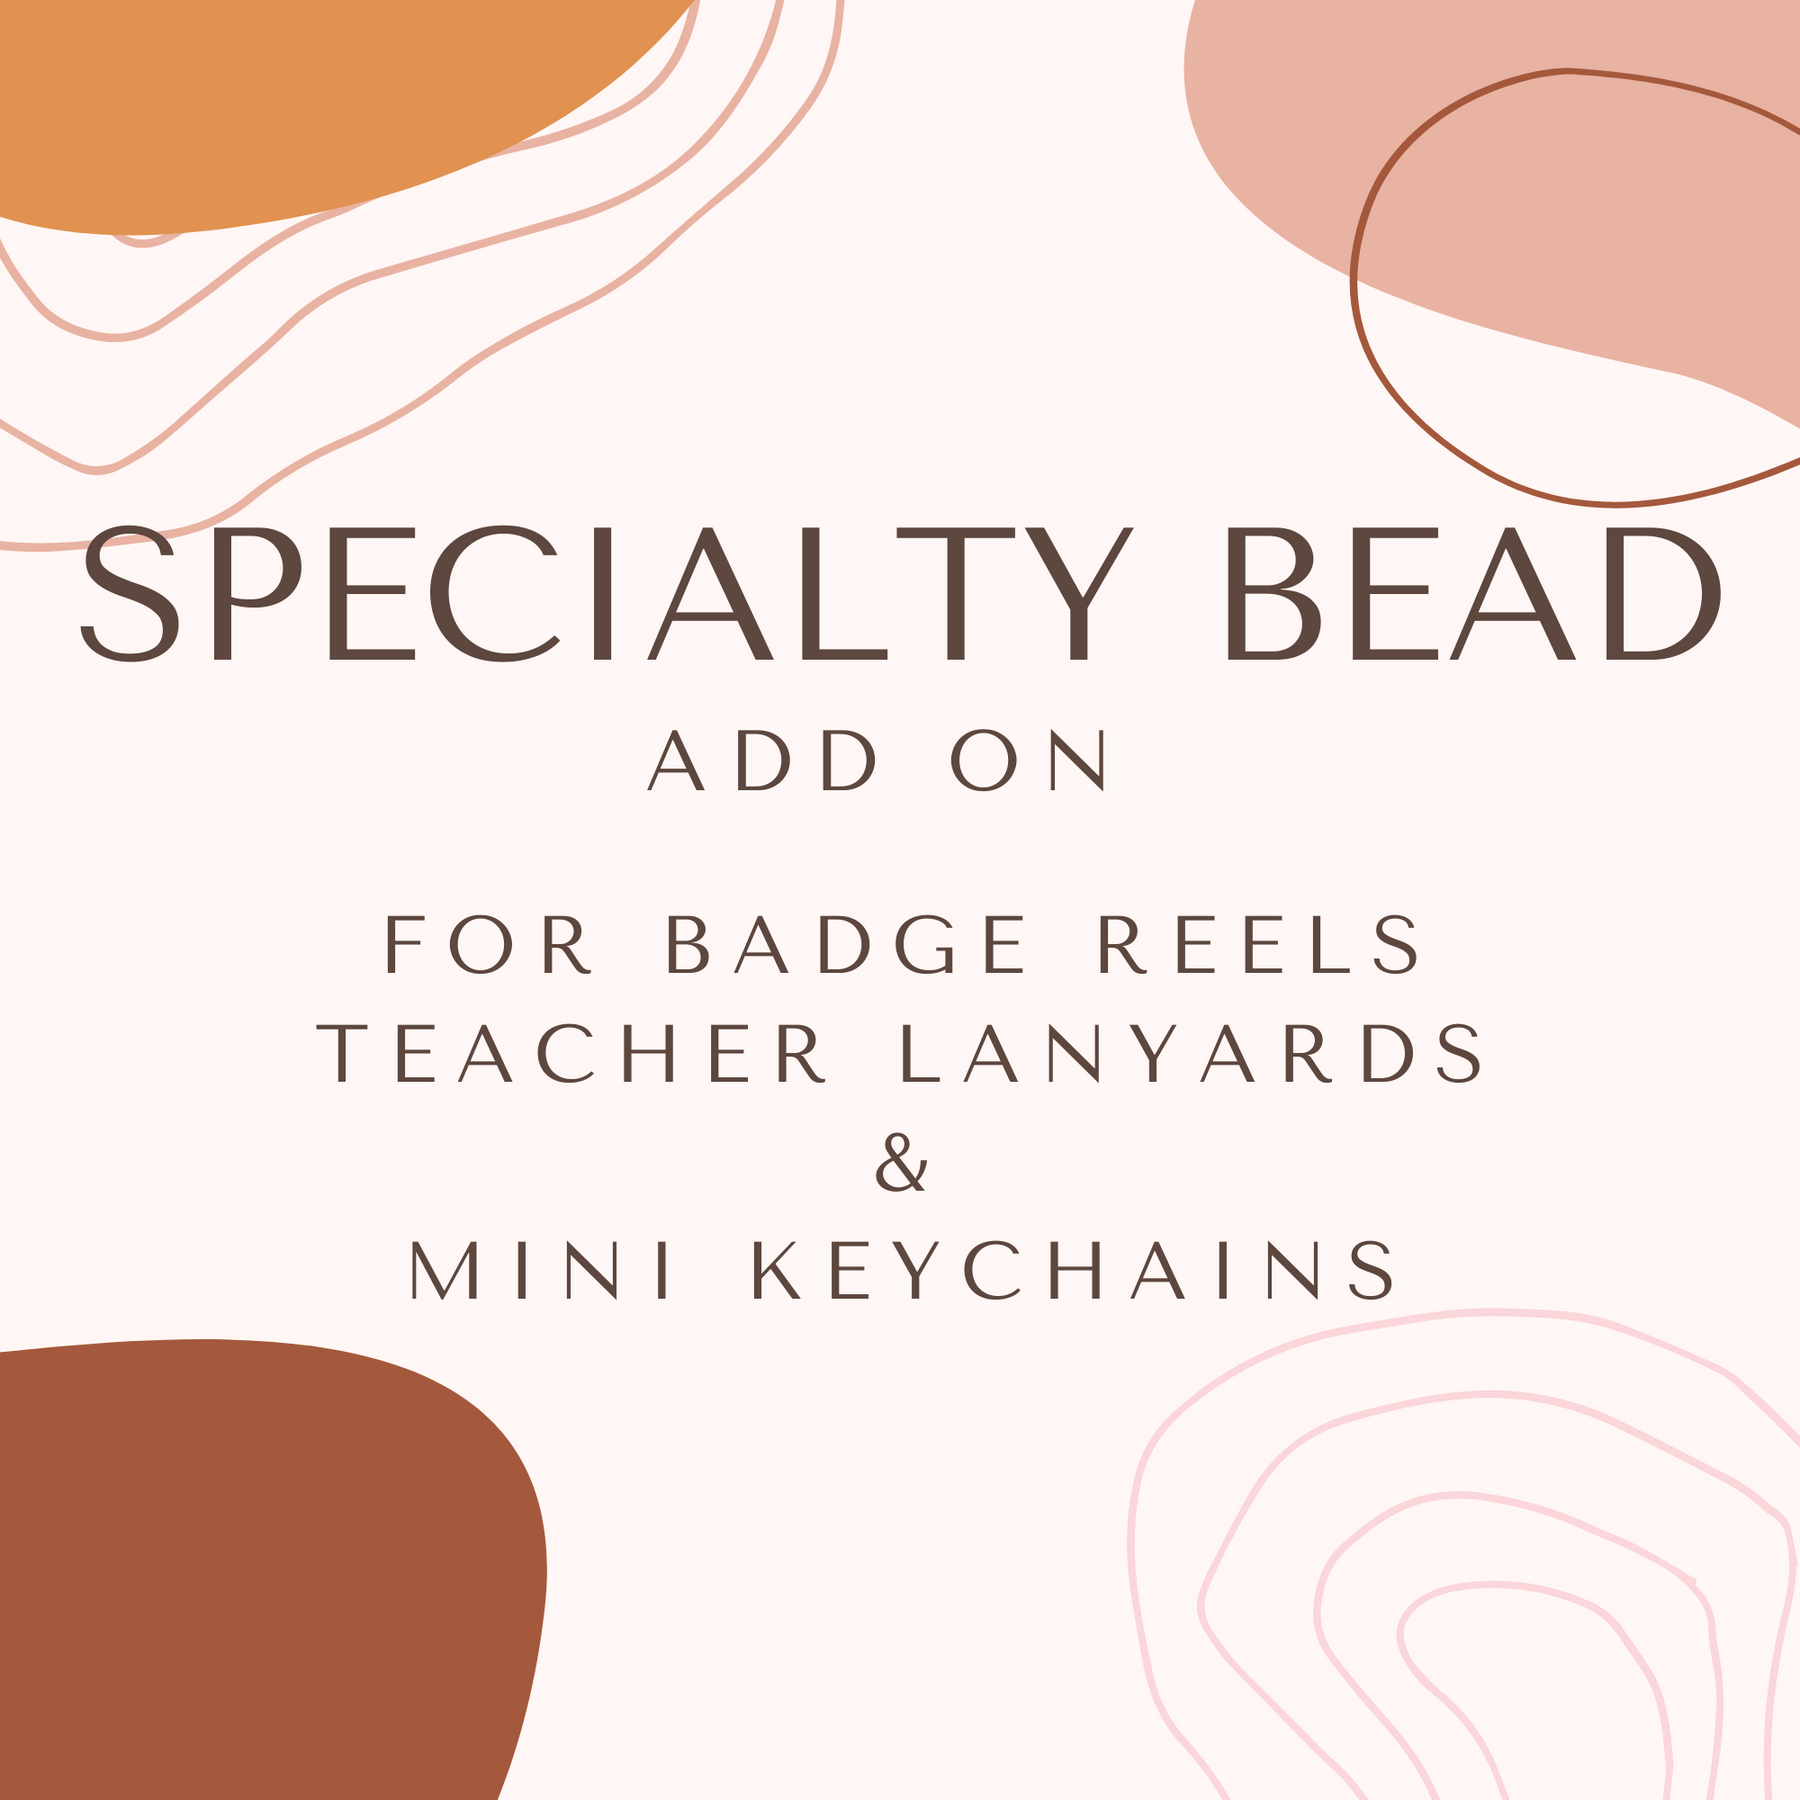 ADD SPECIALITY BEADS FOR BADGE REEL, TEACHER LANYARDS OR MINI KEYCHAINS Rose with Grace LLC